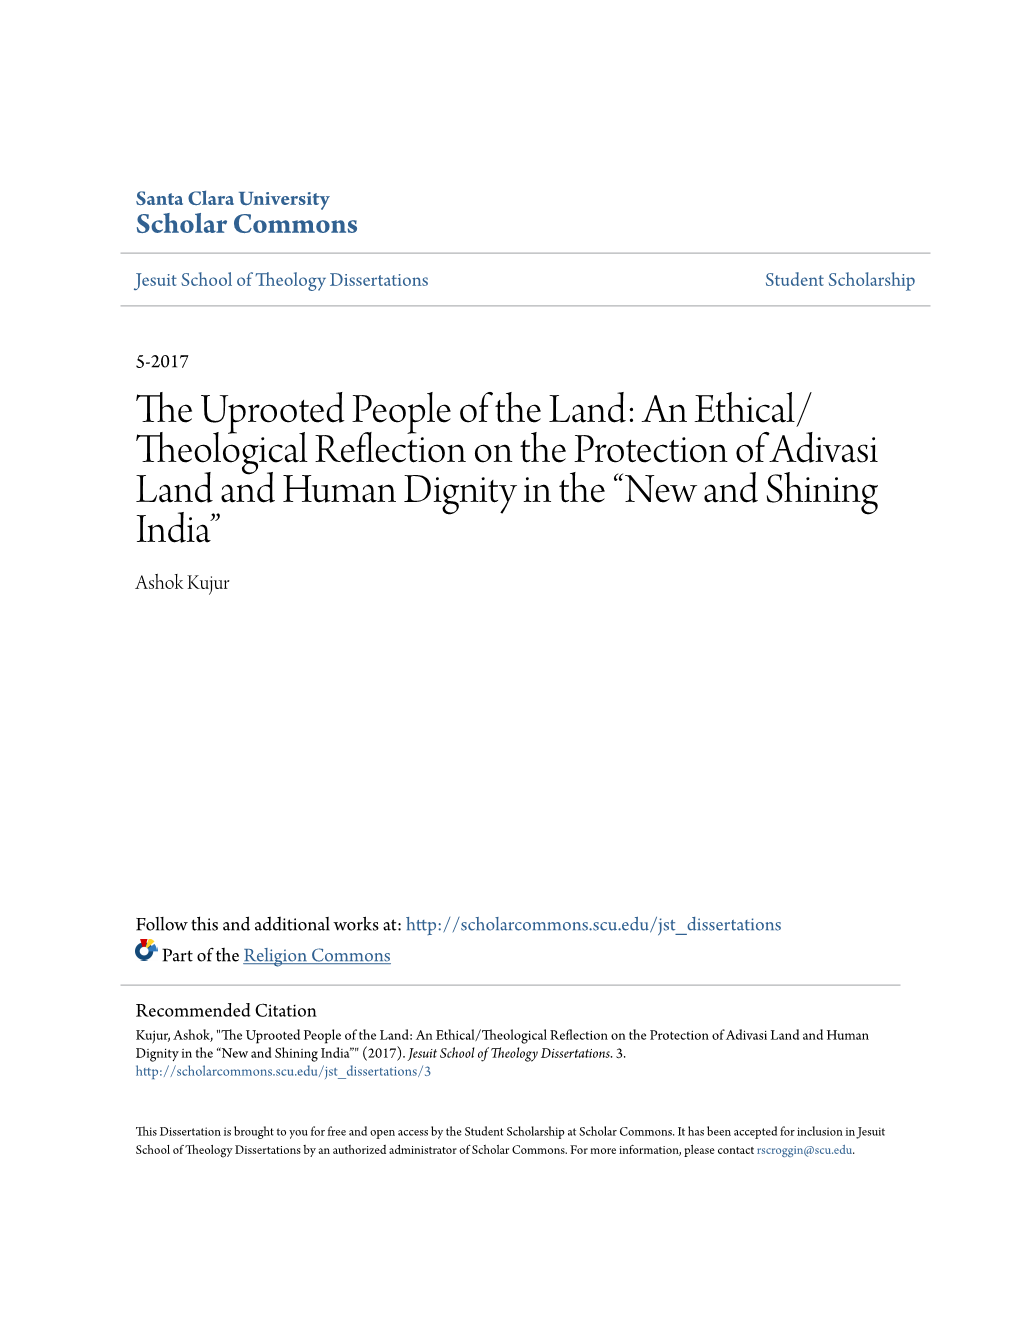 An Ethical/Theological Reflection on the Protection of Adivasi Land and Human Dignity in the “New and Shining India”" (2017)